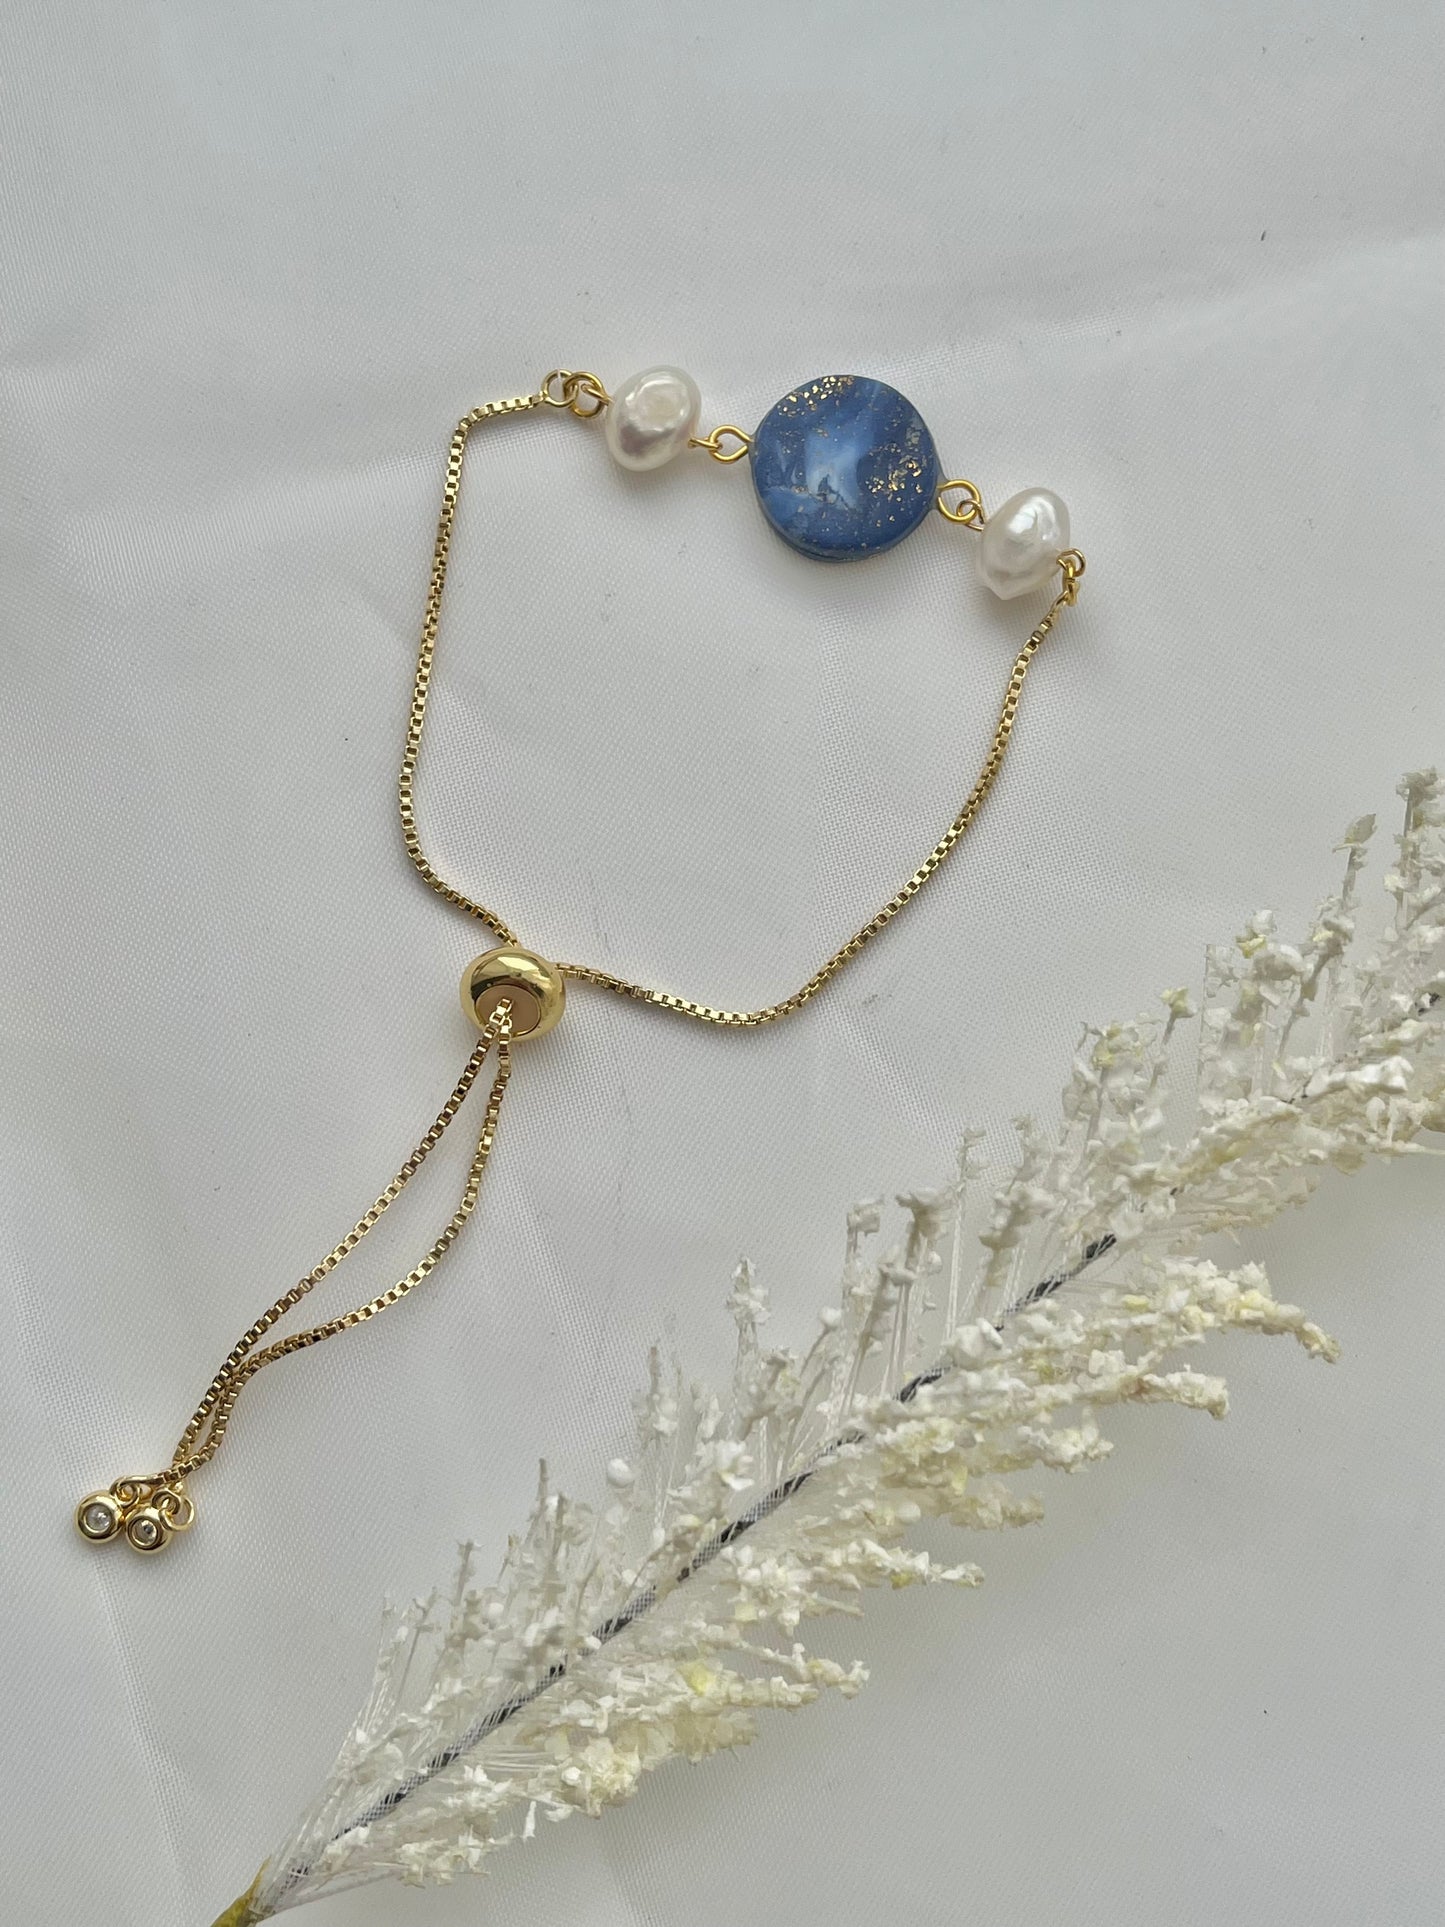 A bracelet with a dark blue clay circle with freshwater pearls on either side laid flat down to show the adjustable slider